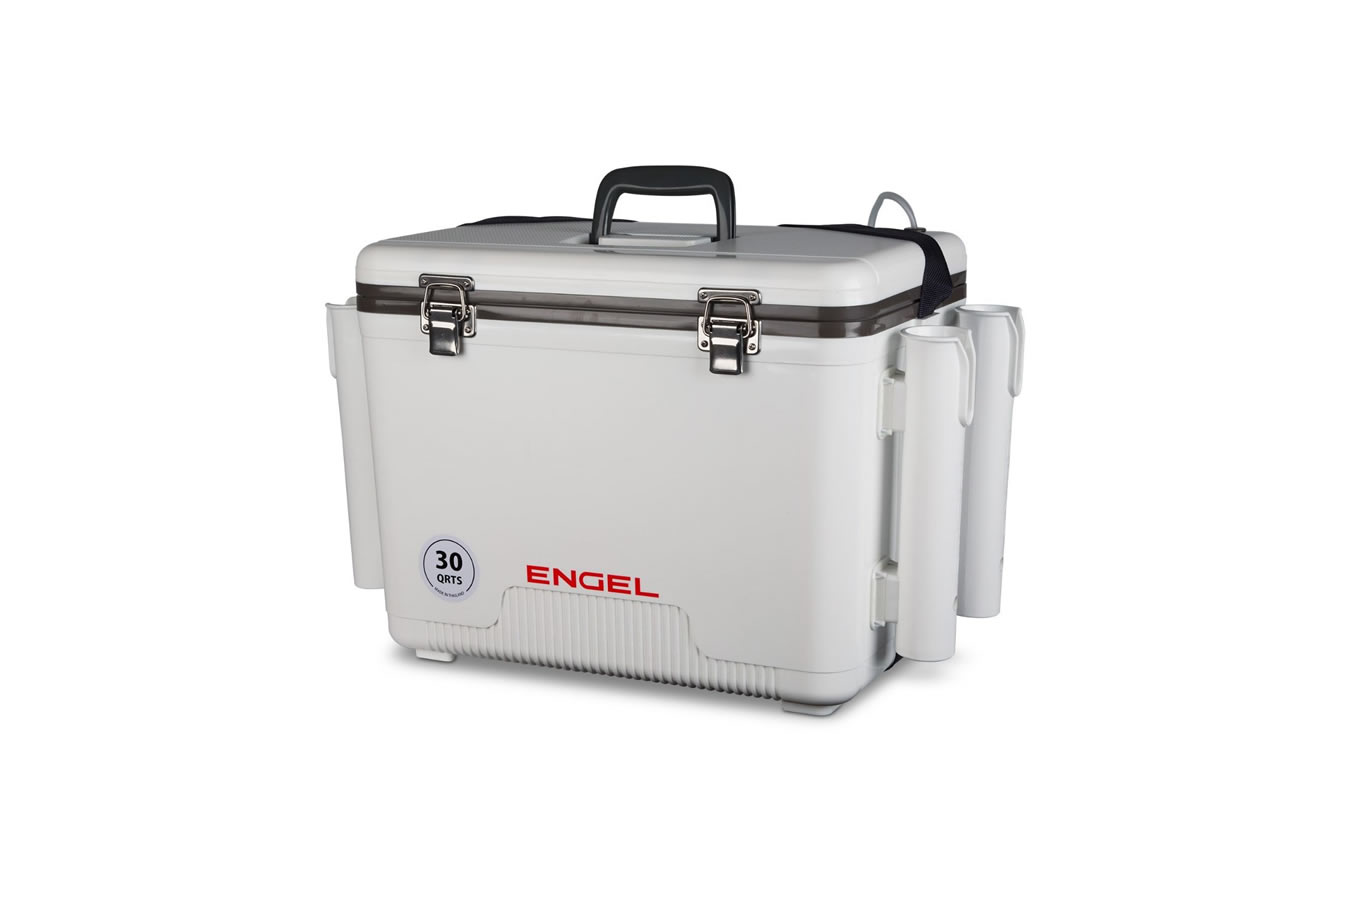 Engel Cooler 30 Qt Live Bait Dry Box/ Cooler with Rod Holders in White